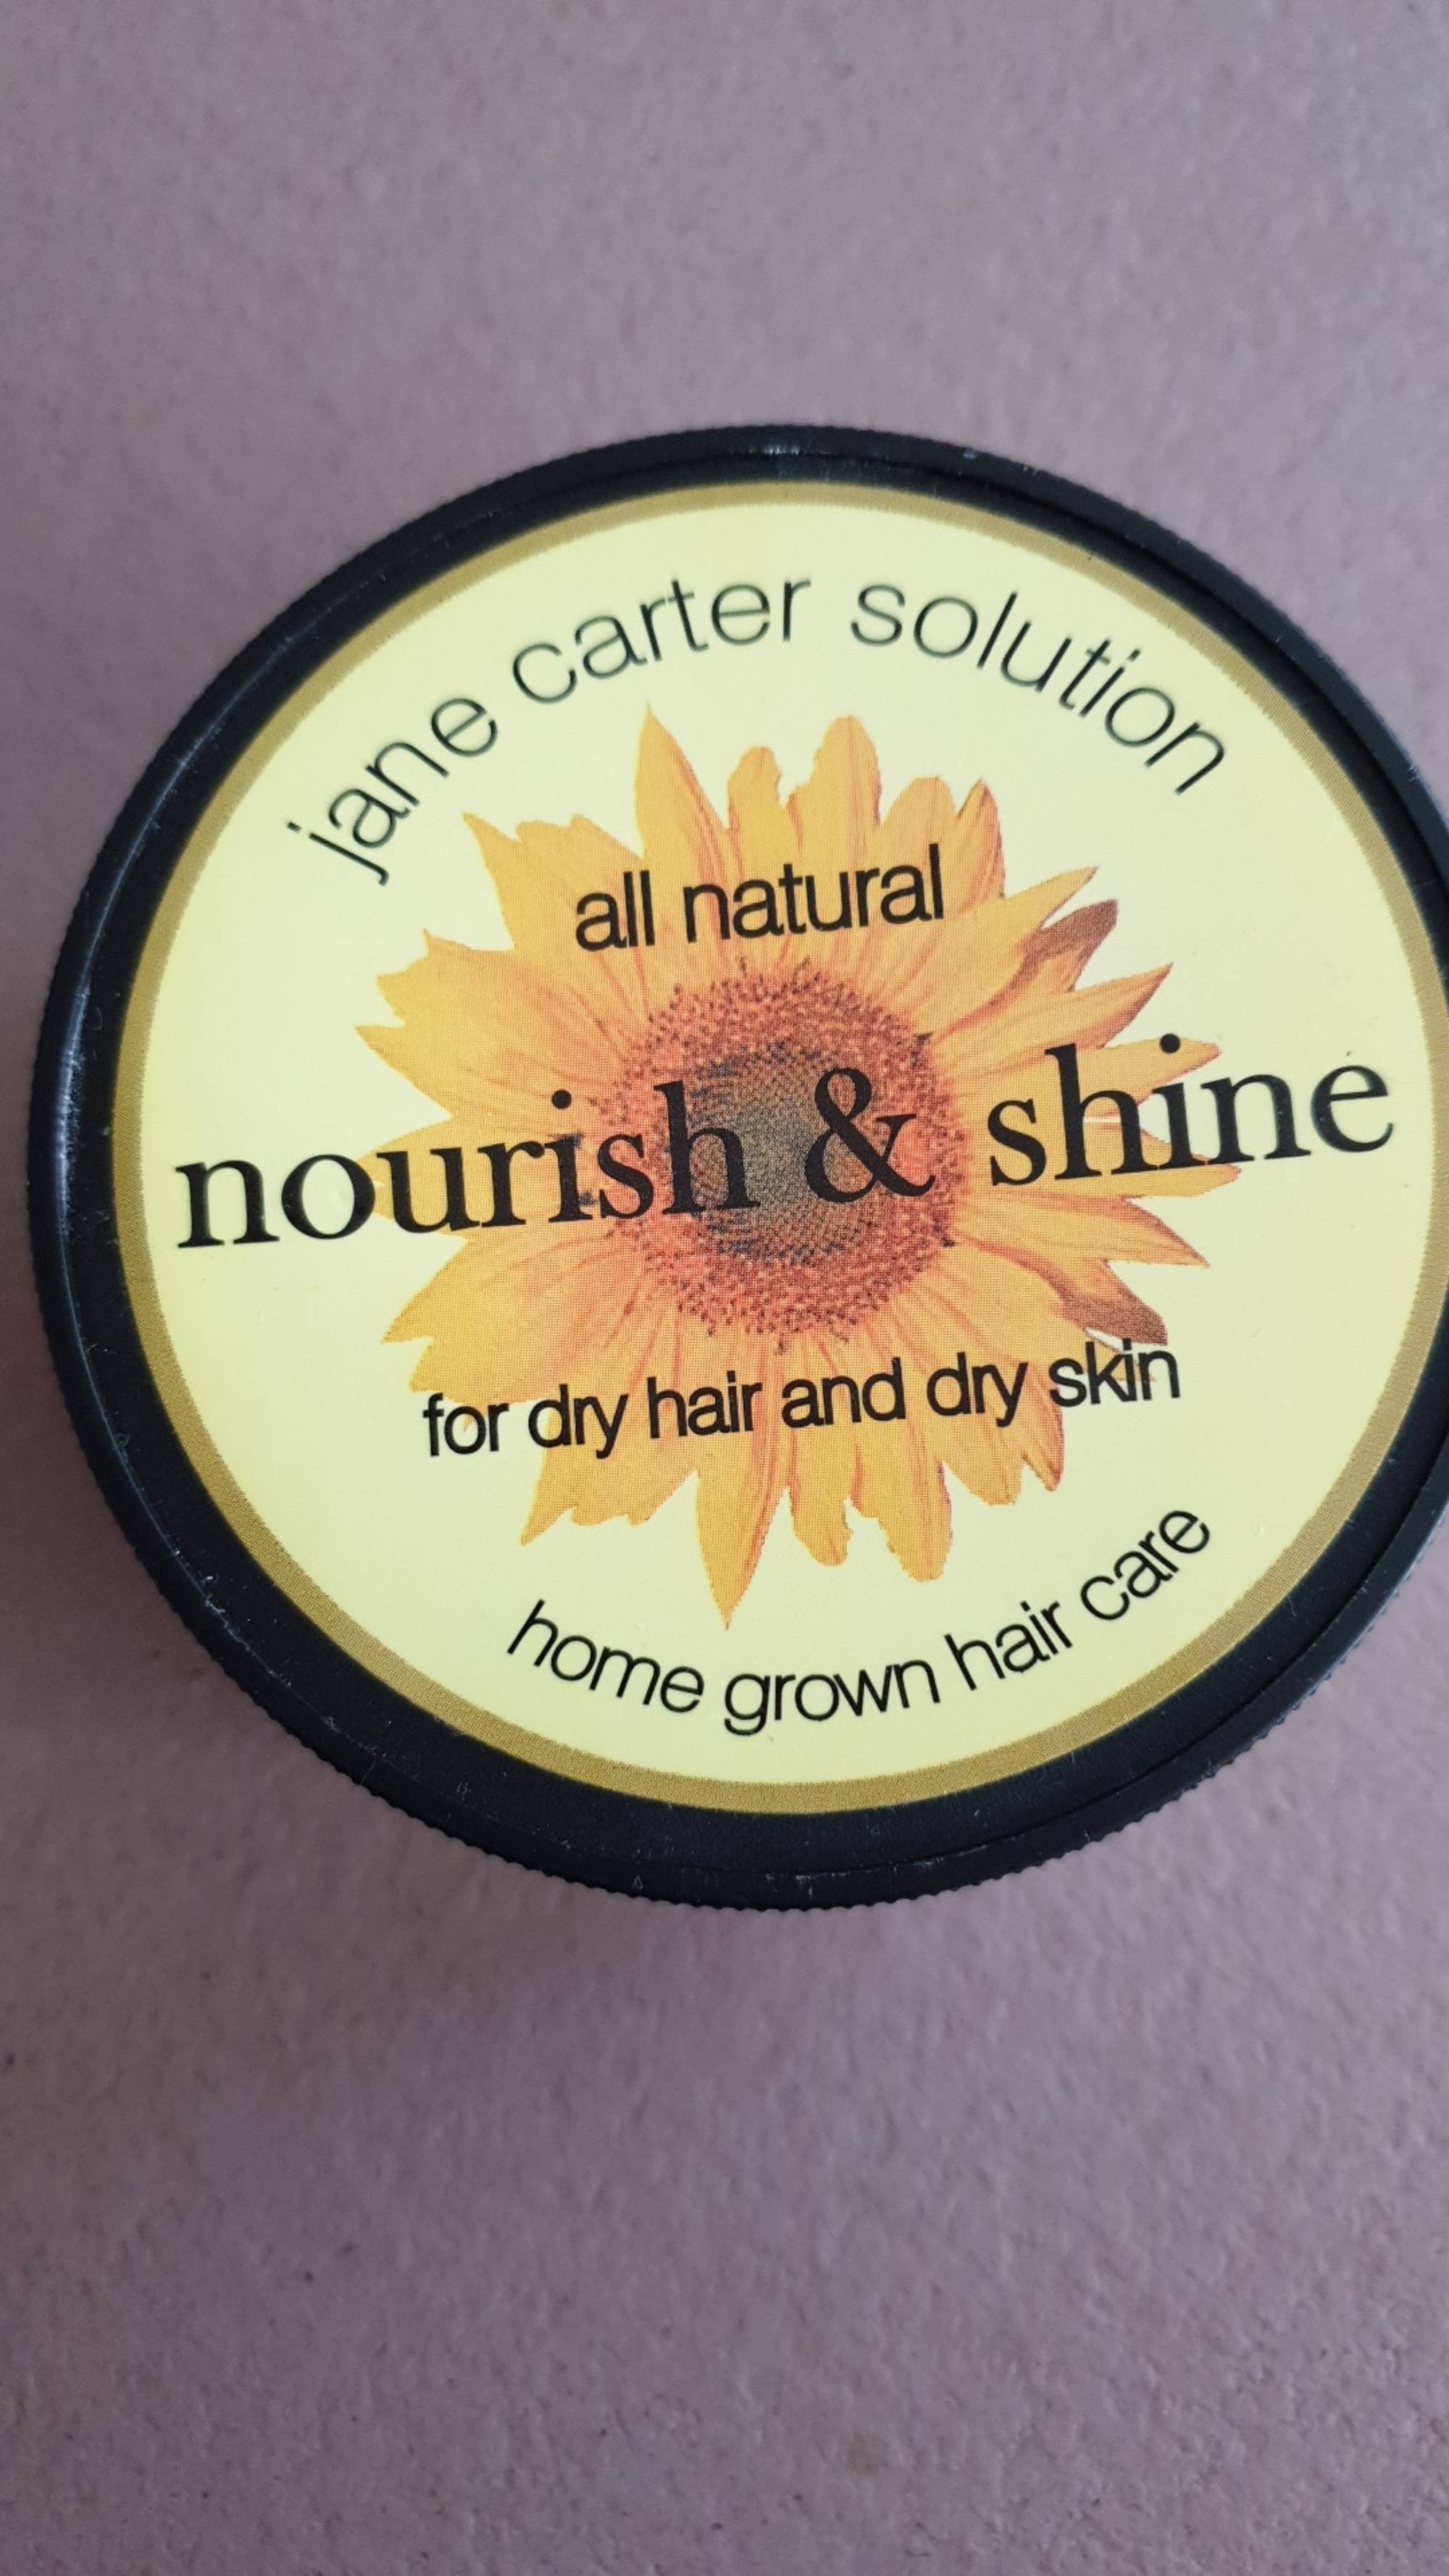 JANE CARTER SOLUTION - Nourish & shine for dry hair and dry skin